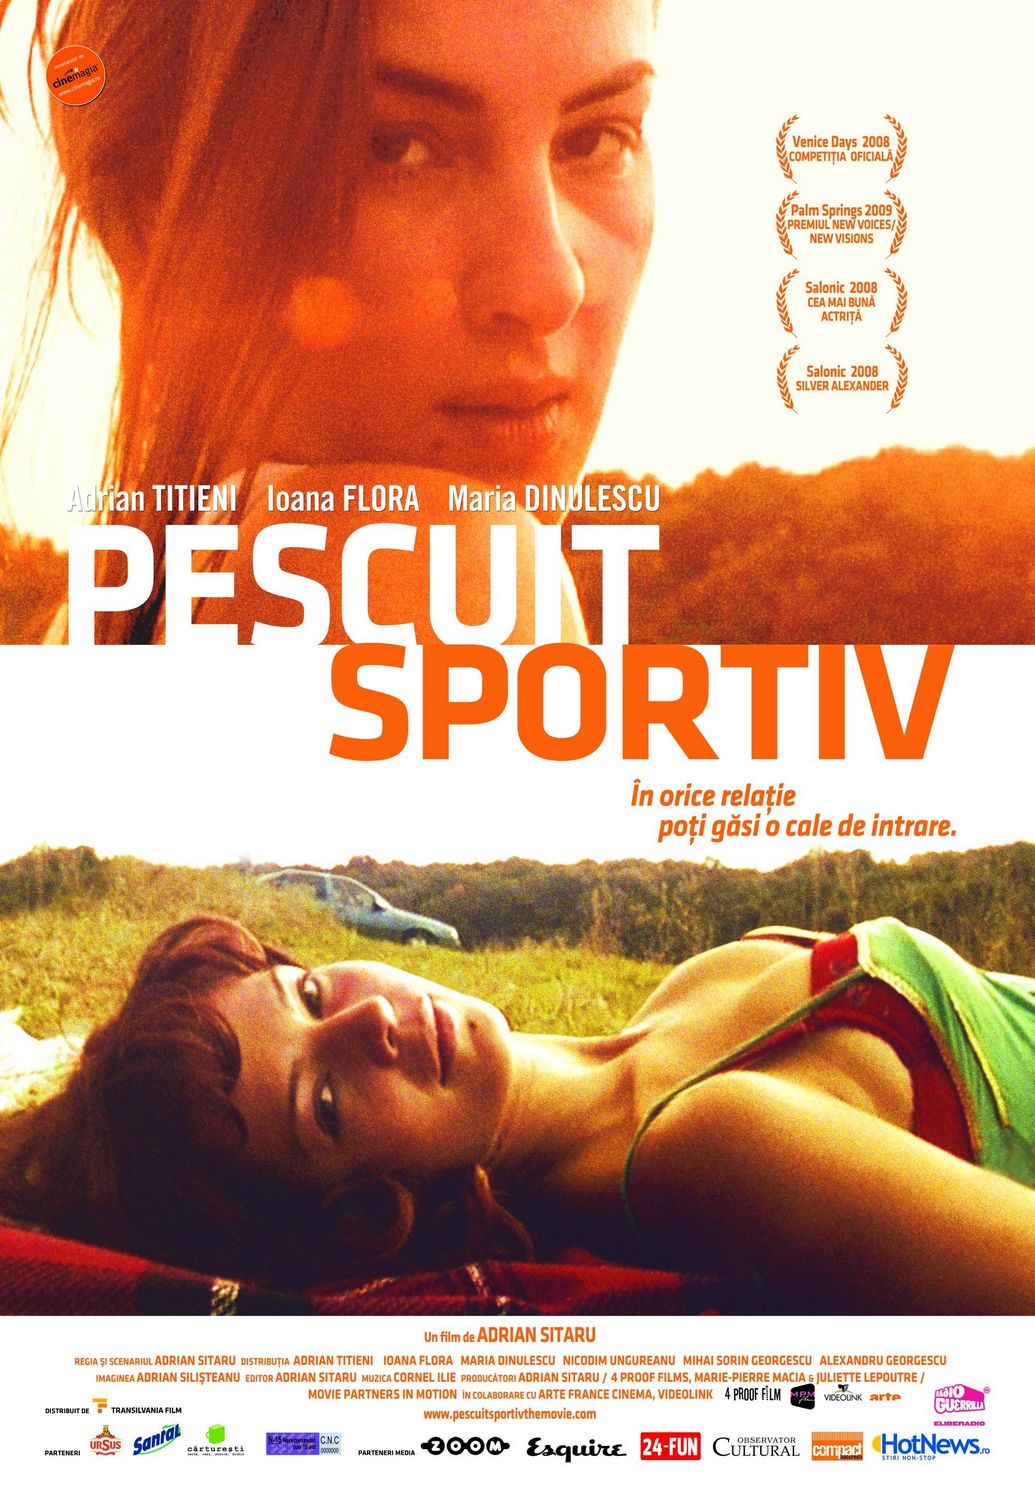 Extra Large Movie Poster Image for Pescuit sportiv 